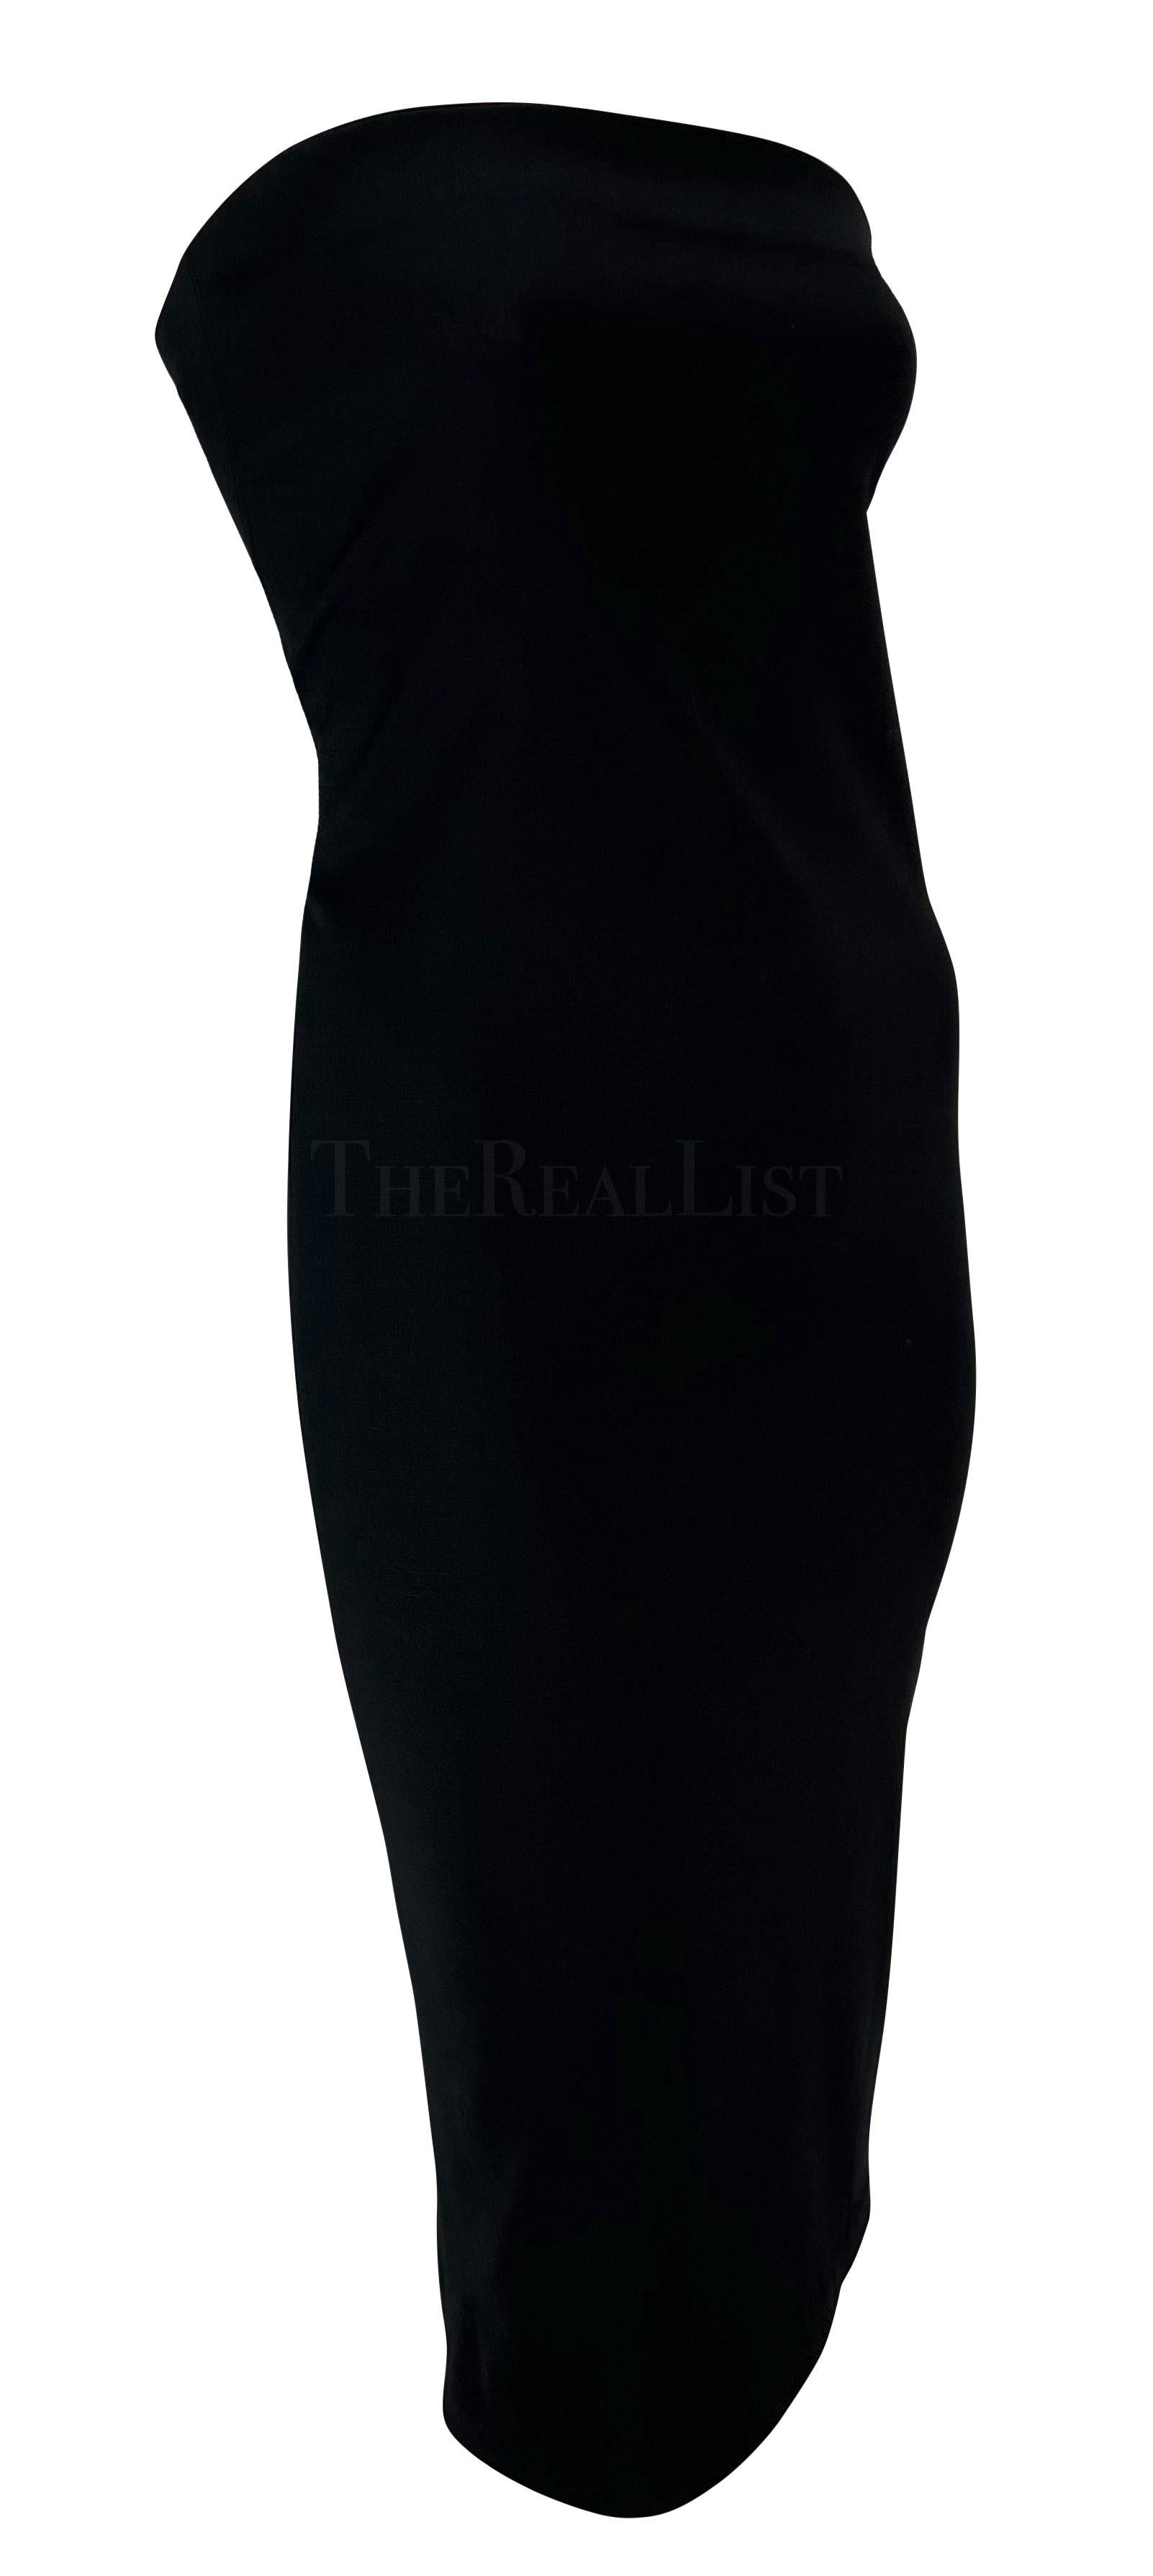 S/S 1997 Gucci by Tom Ford Runway Ad Black Strapless Bodycon Mini Dress For Sale 5